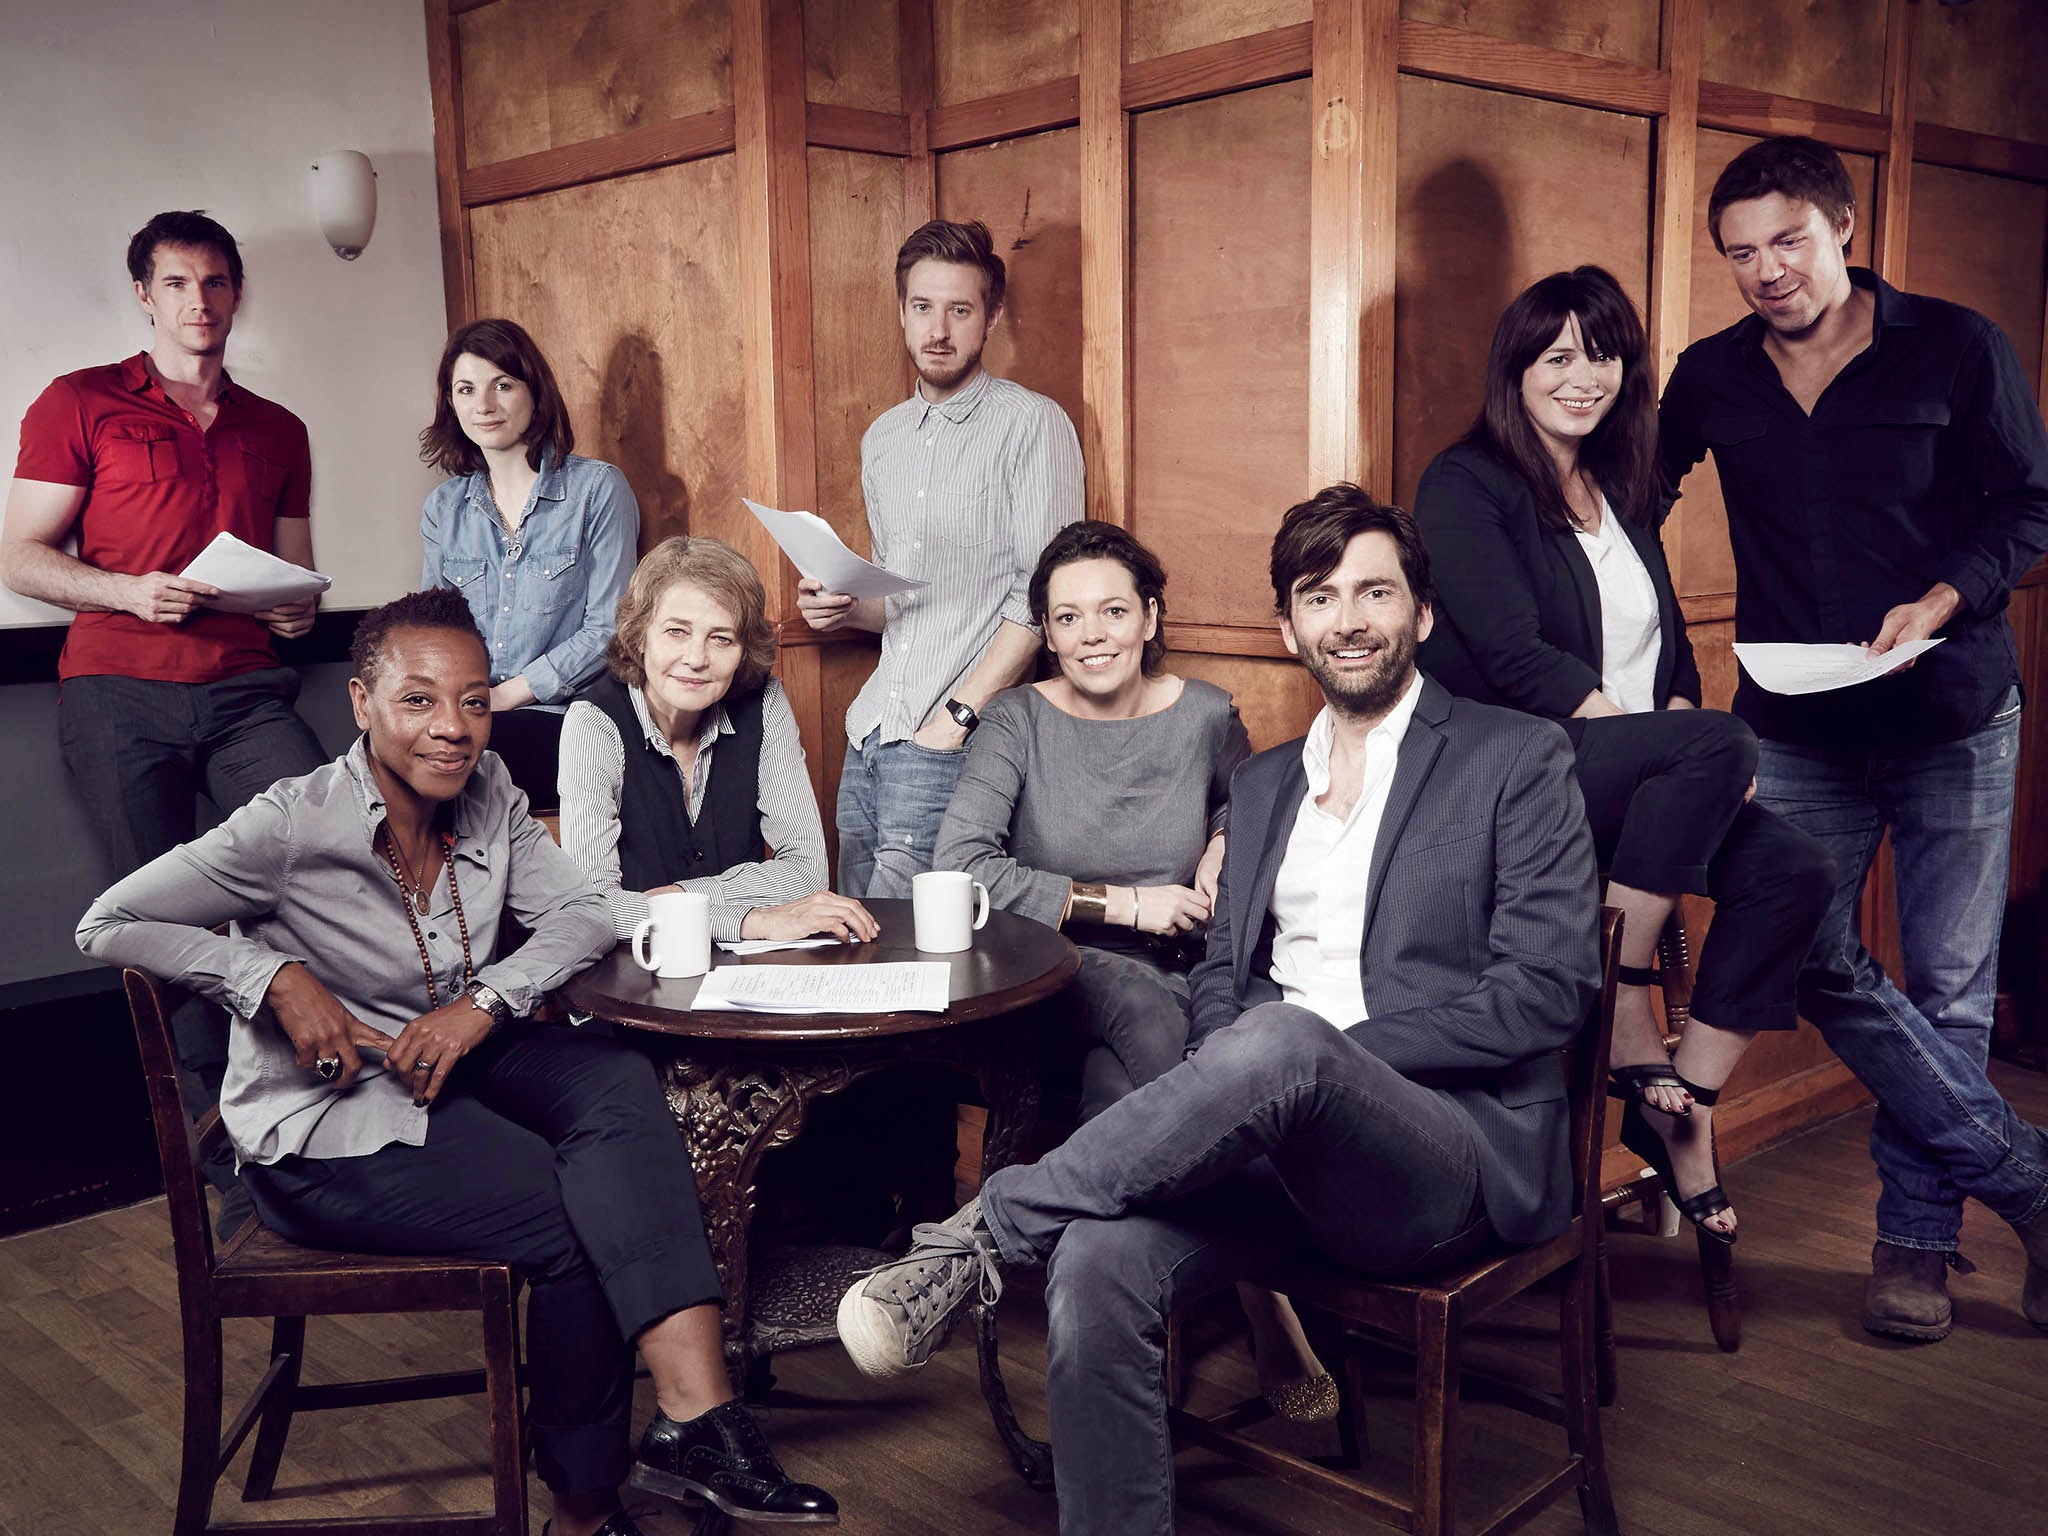 The cast of multi award winning drama Broadchurch attended the read-through for the second series of the drama in London.